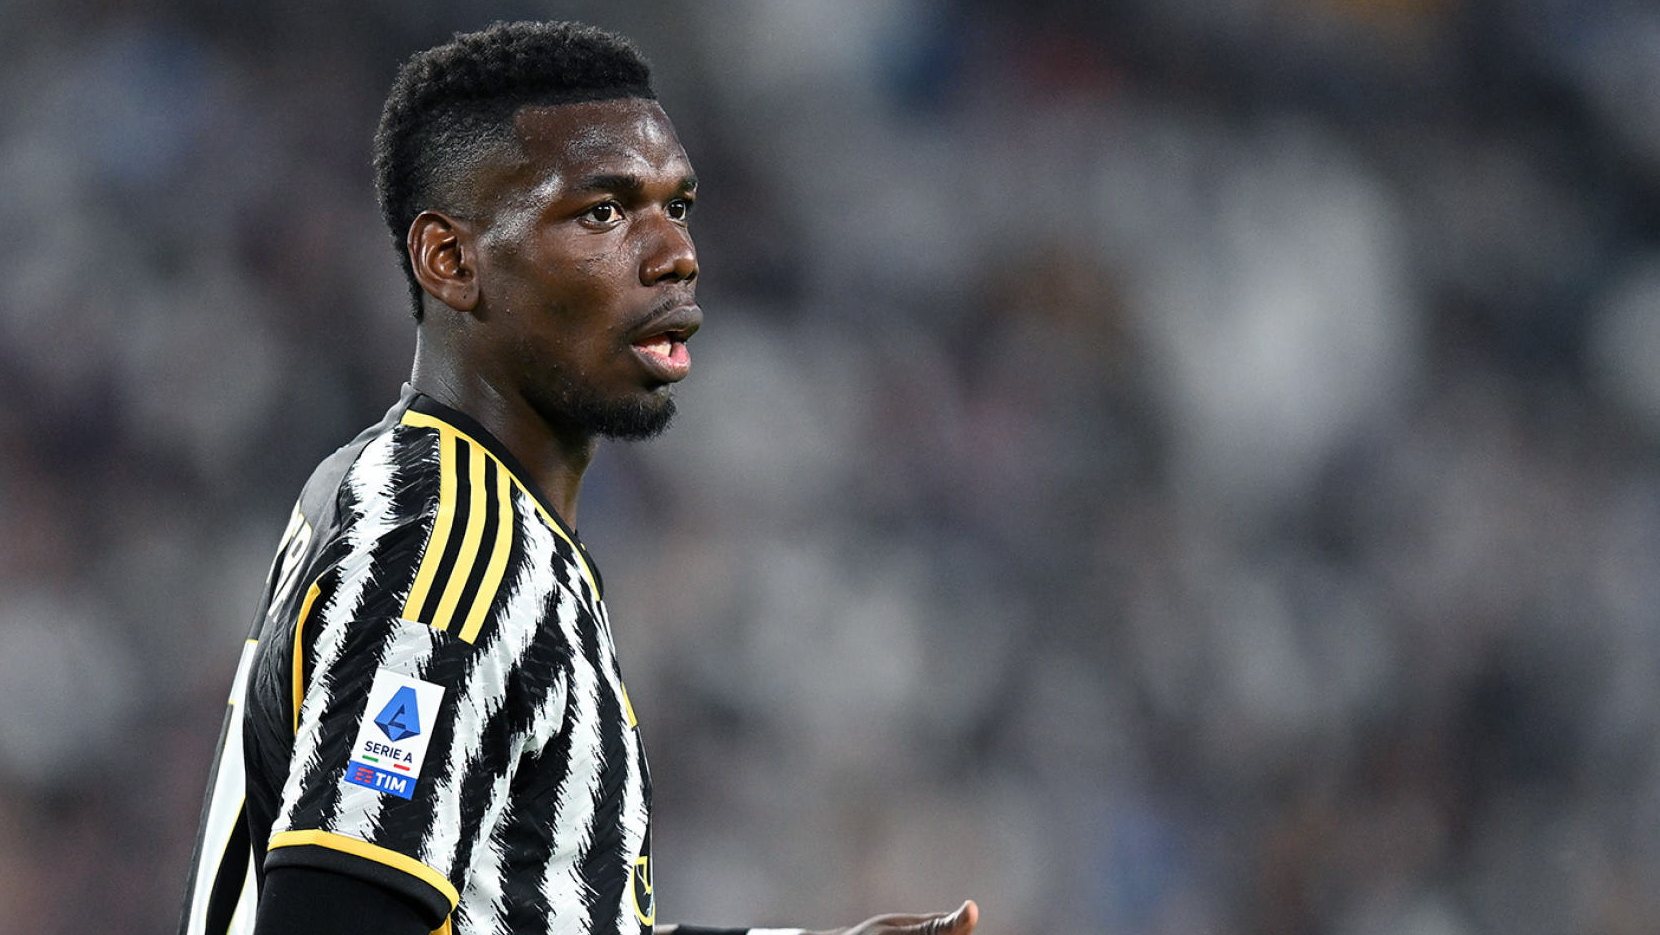 epa10855201 (FILE) A file photograph dated 14 May 2023 shows Juventus&#039; Paul Pogba reacting during the Italian Serie A soccer match Juventus FC vs US Cremonese at the Allianz Stadium in Turin, Italy, re-issued 11 September 2023. Juventus released a statement on 11 September 2023, that Paul Pogba was provisionally suspended after testing positive for testosterone.  EPA/ALESSANDRO DI MARCO